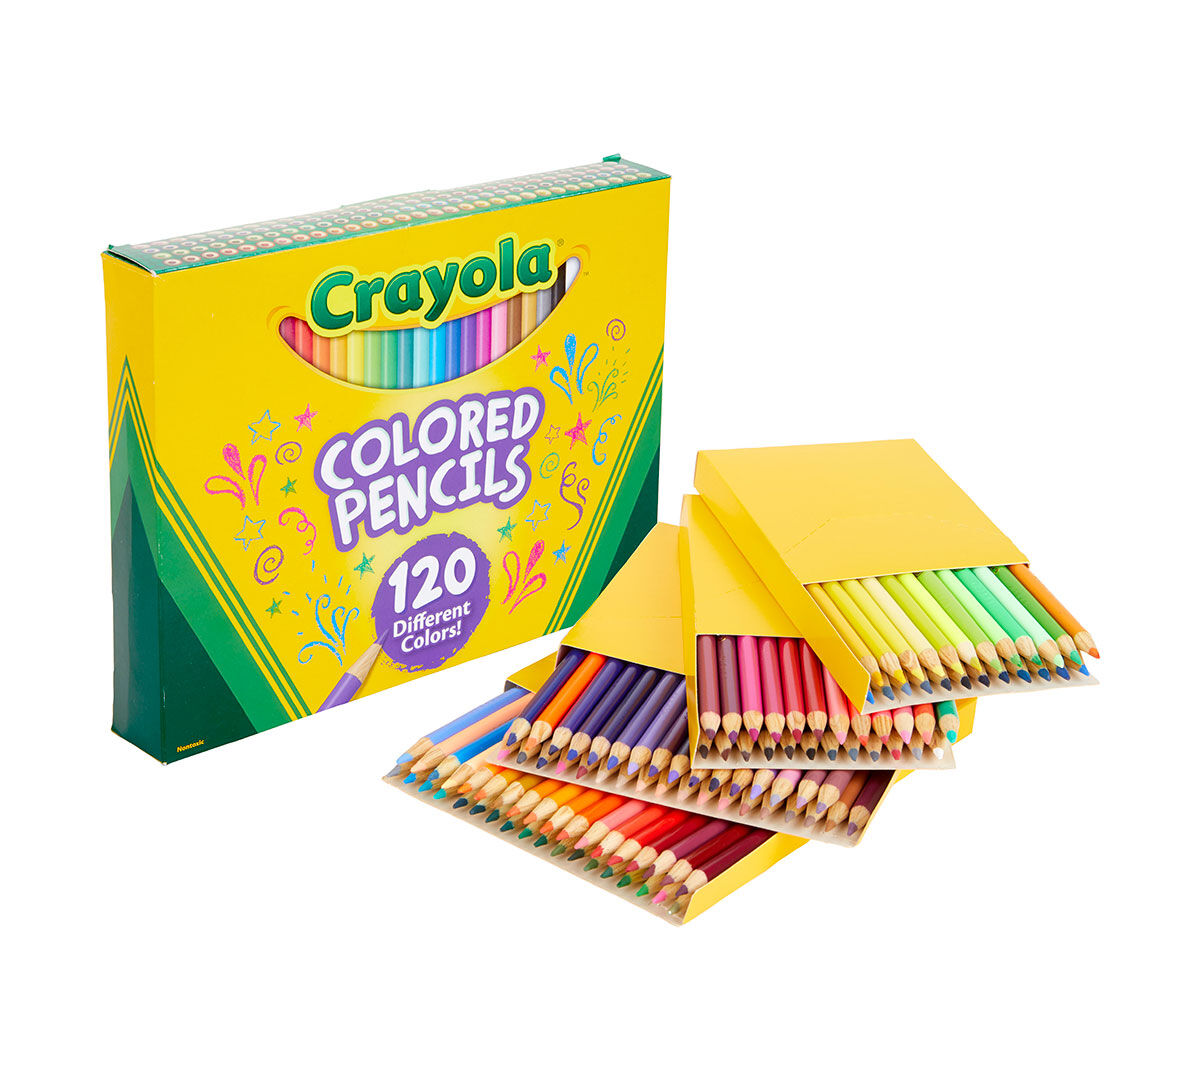 Multi Pack of 2 Crayola colored pencils 